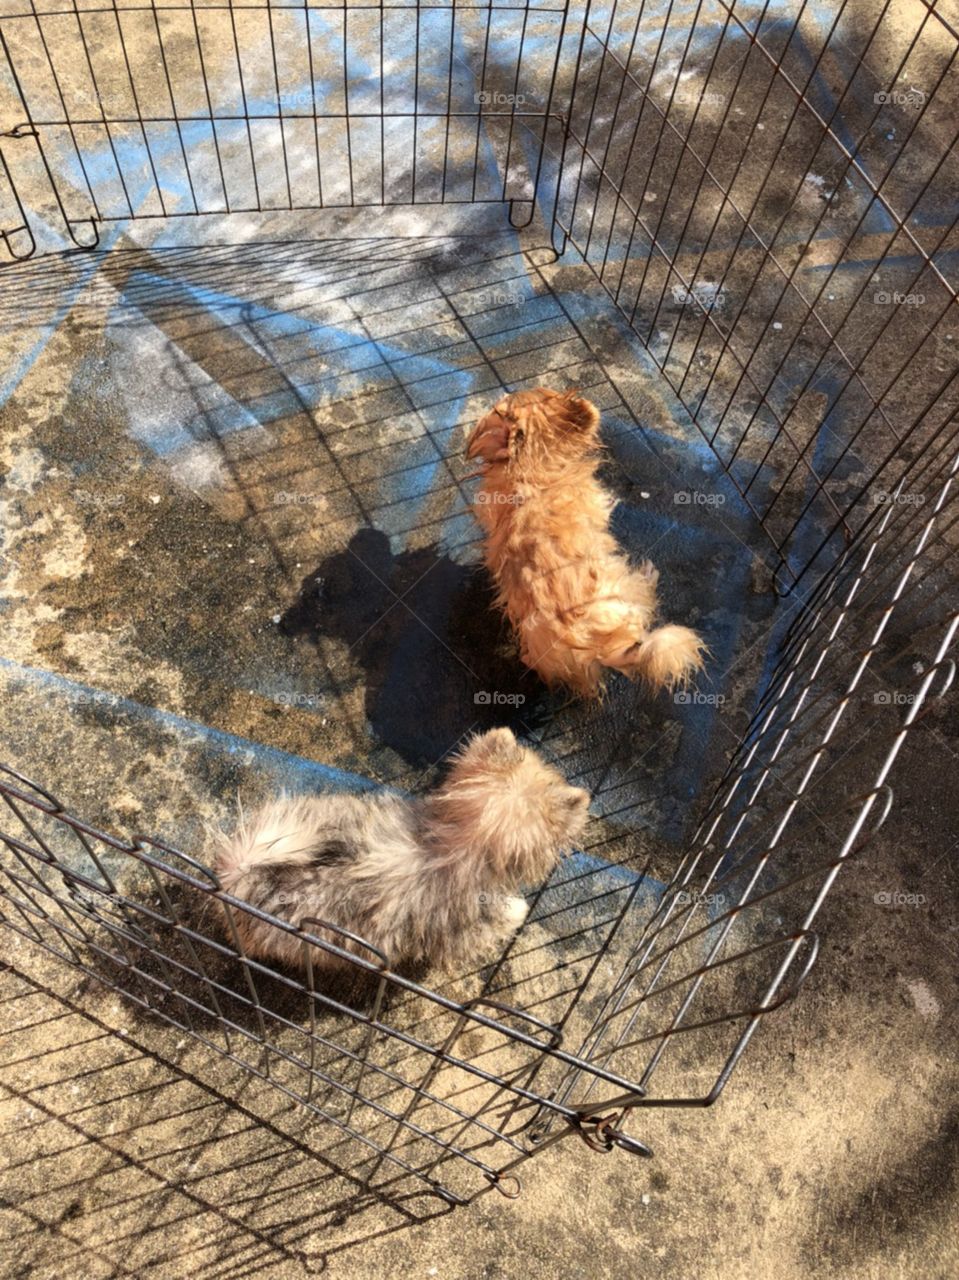 two fluffy puppy " pomeranian" after taking a bath running in the sun together.